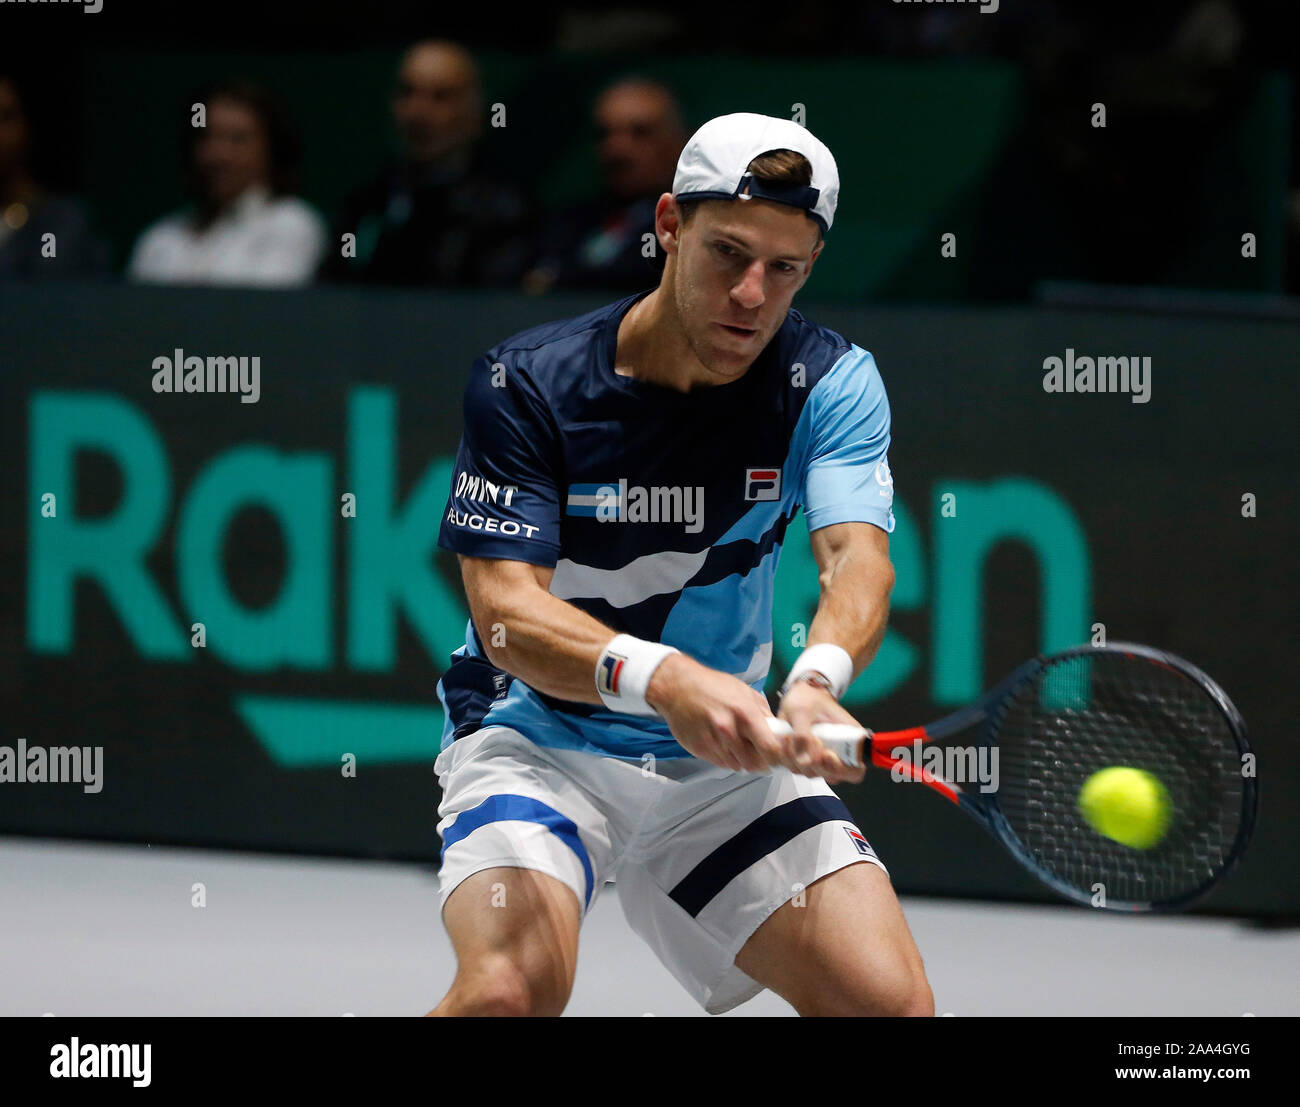 Diego Schwartzman of Argentina in action during the singles match against Cristian Garin of Chile on Day 2 of the 2019 Davis Cup at La Caja Magica. Stock Photo